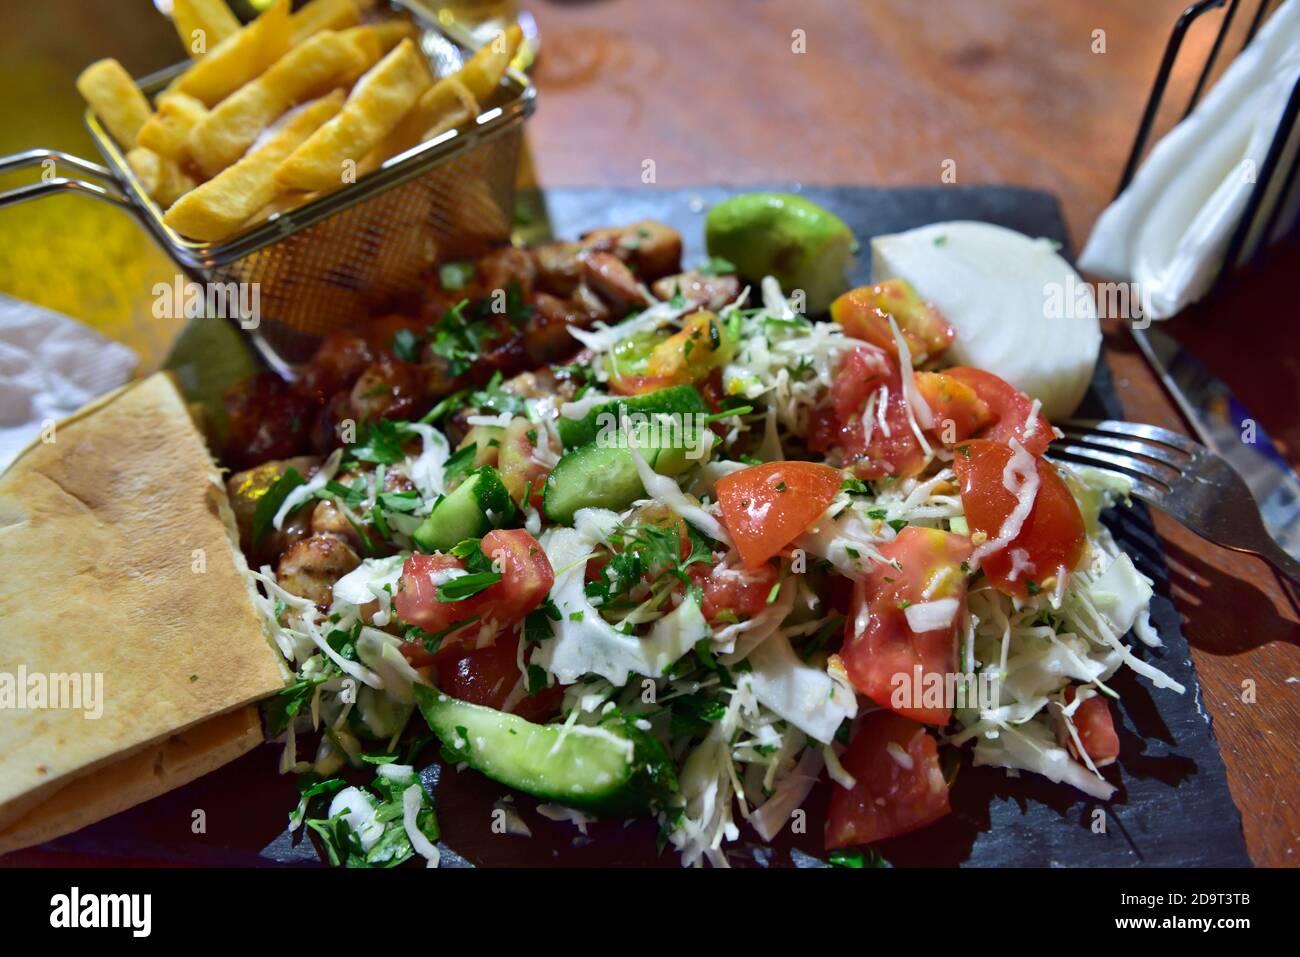 Green salad, chips and pitta bread in restaurant Stock Photo